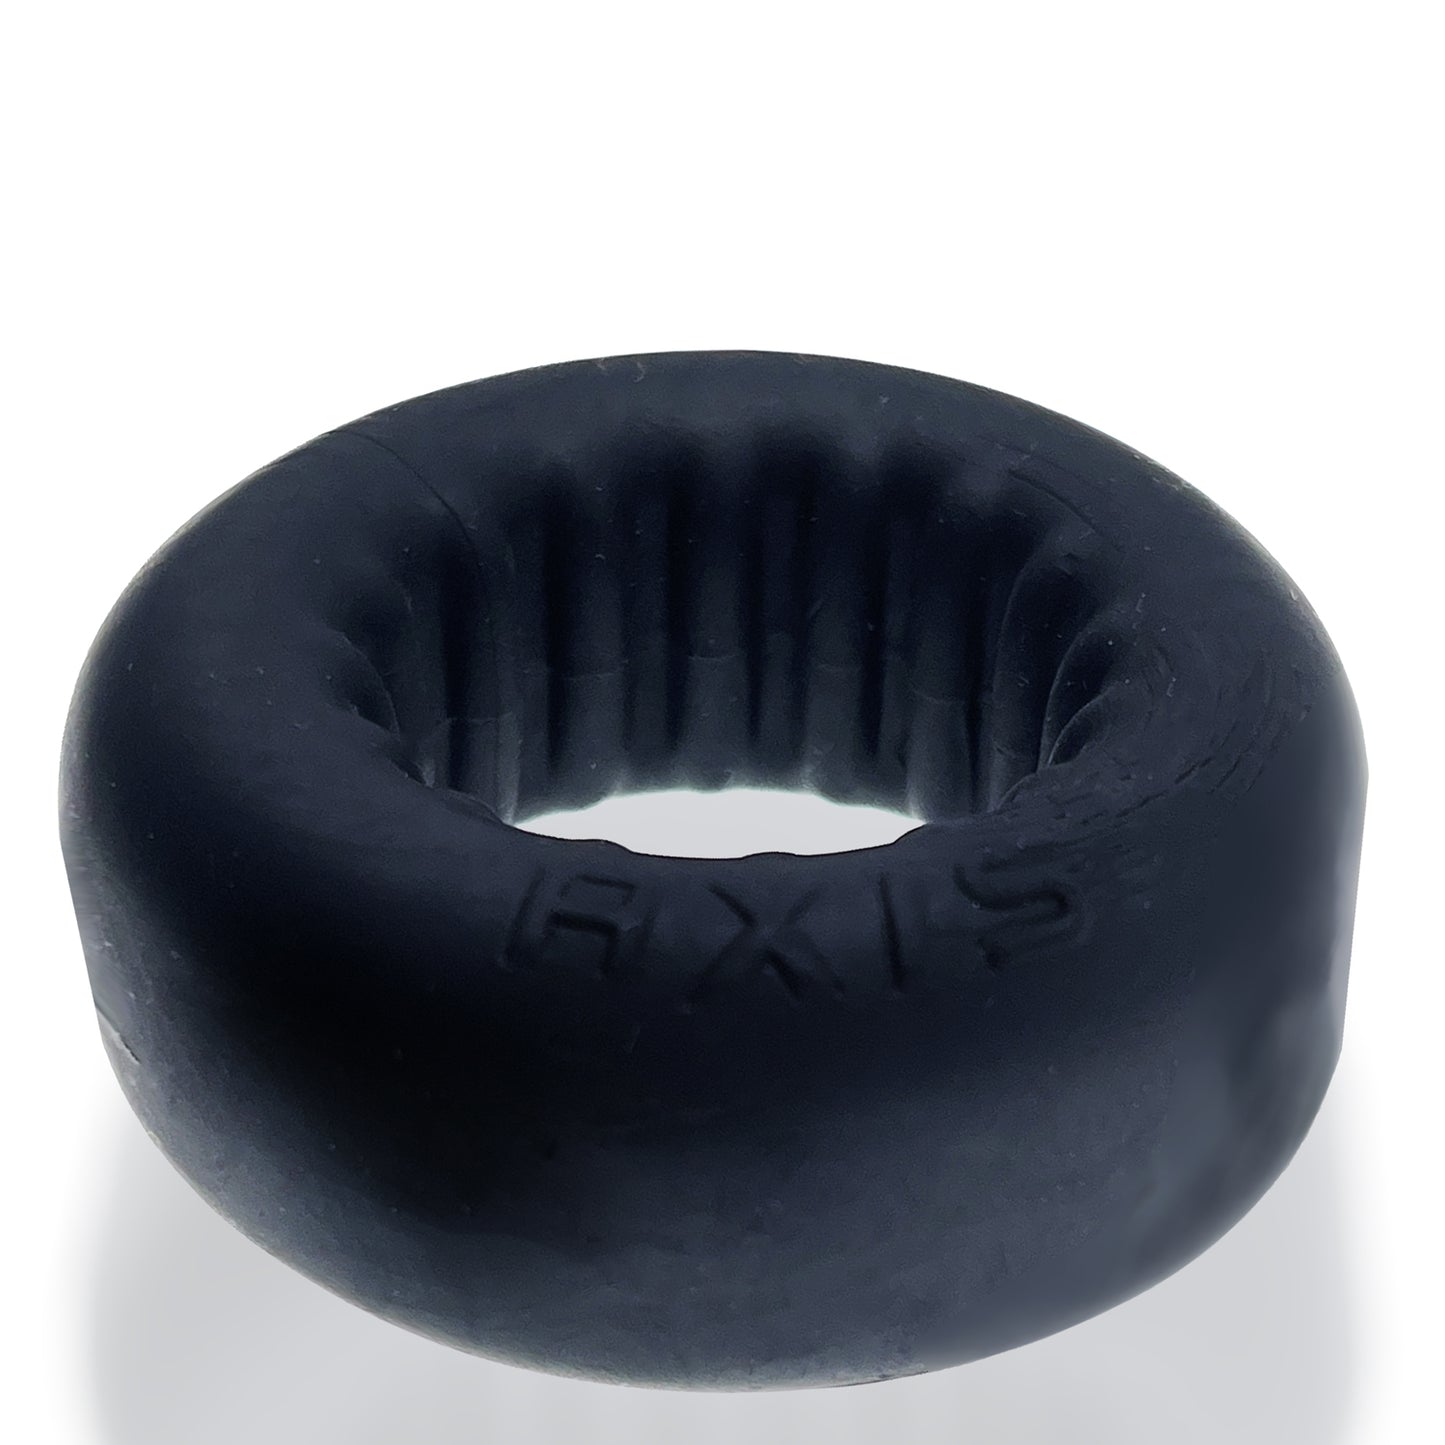 Axis - Rib Griphold Cockring - Black Ice